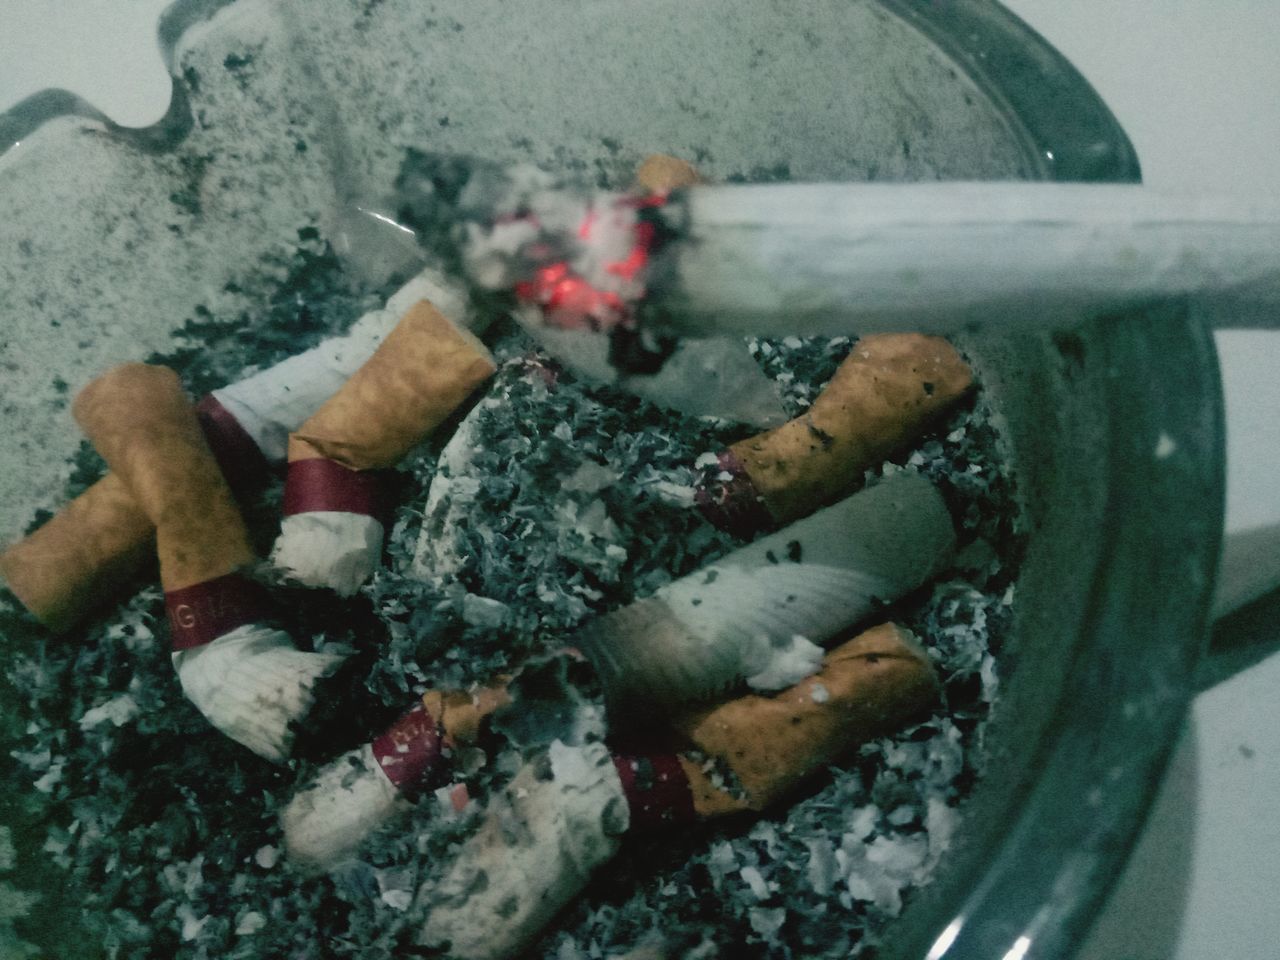 CLOSE-UP HIGH ANGLE VIEW OF CIGARETTE SMOKING